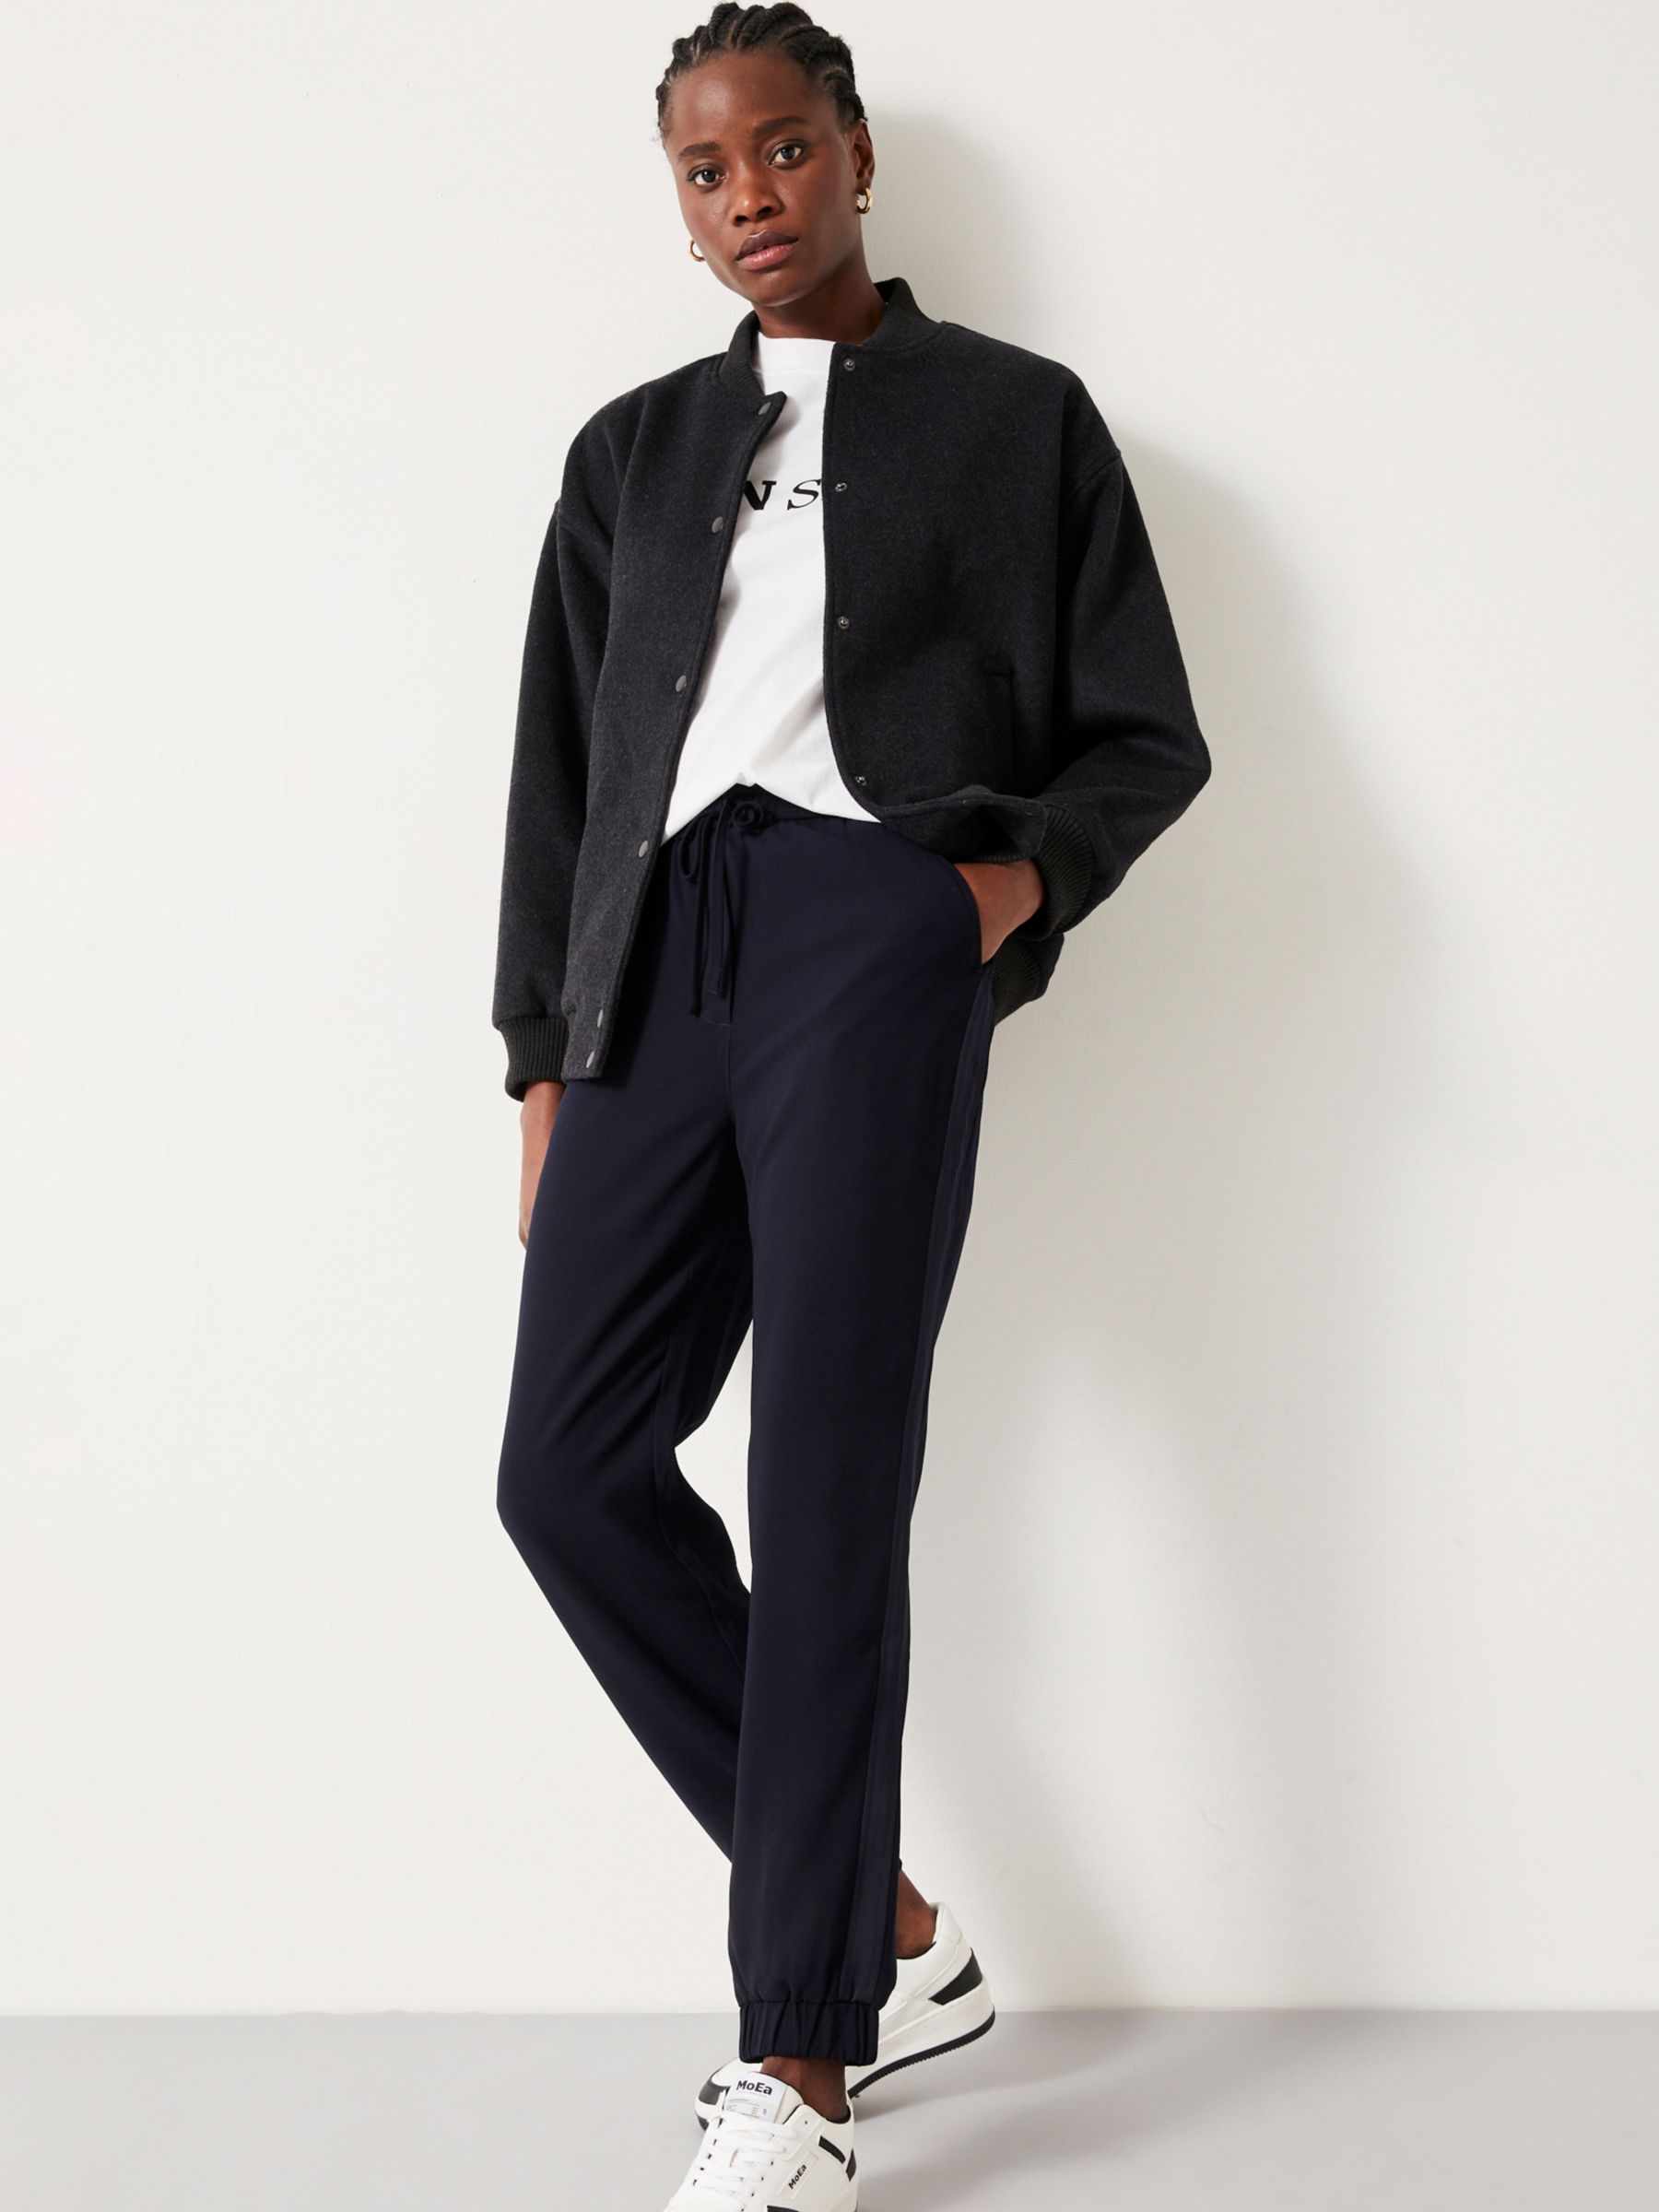 HUSH Crepe Cuffed Trousers, Midnight Navy at John Lewis & Partners